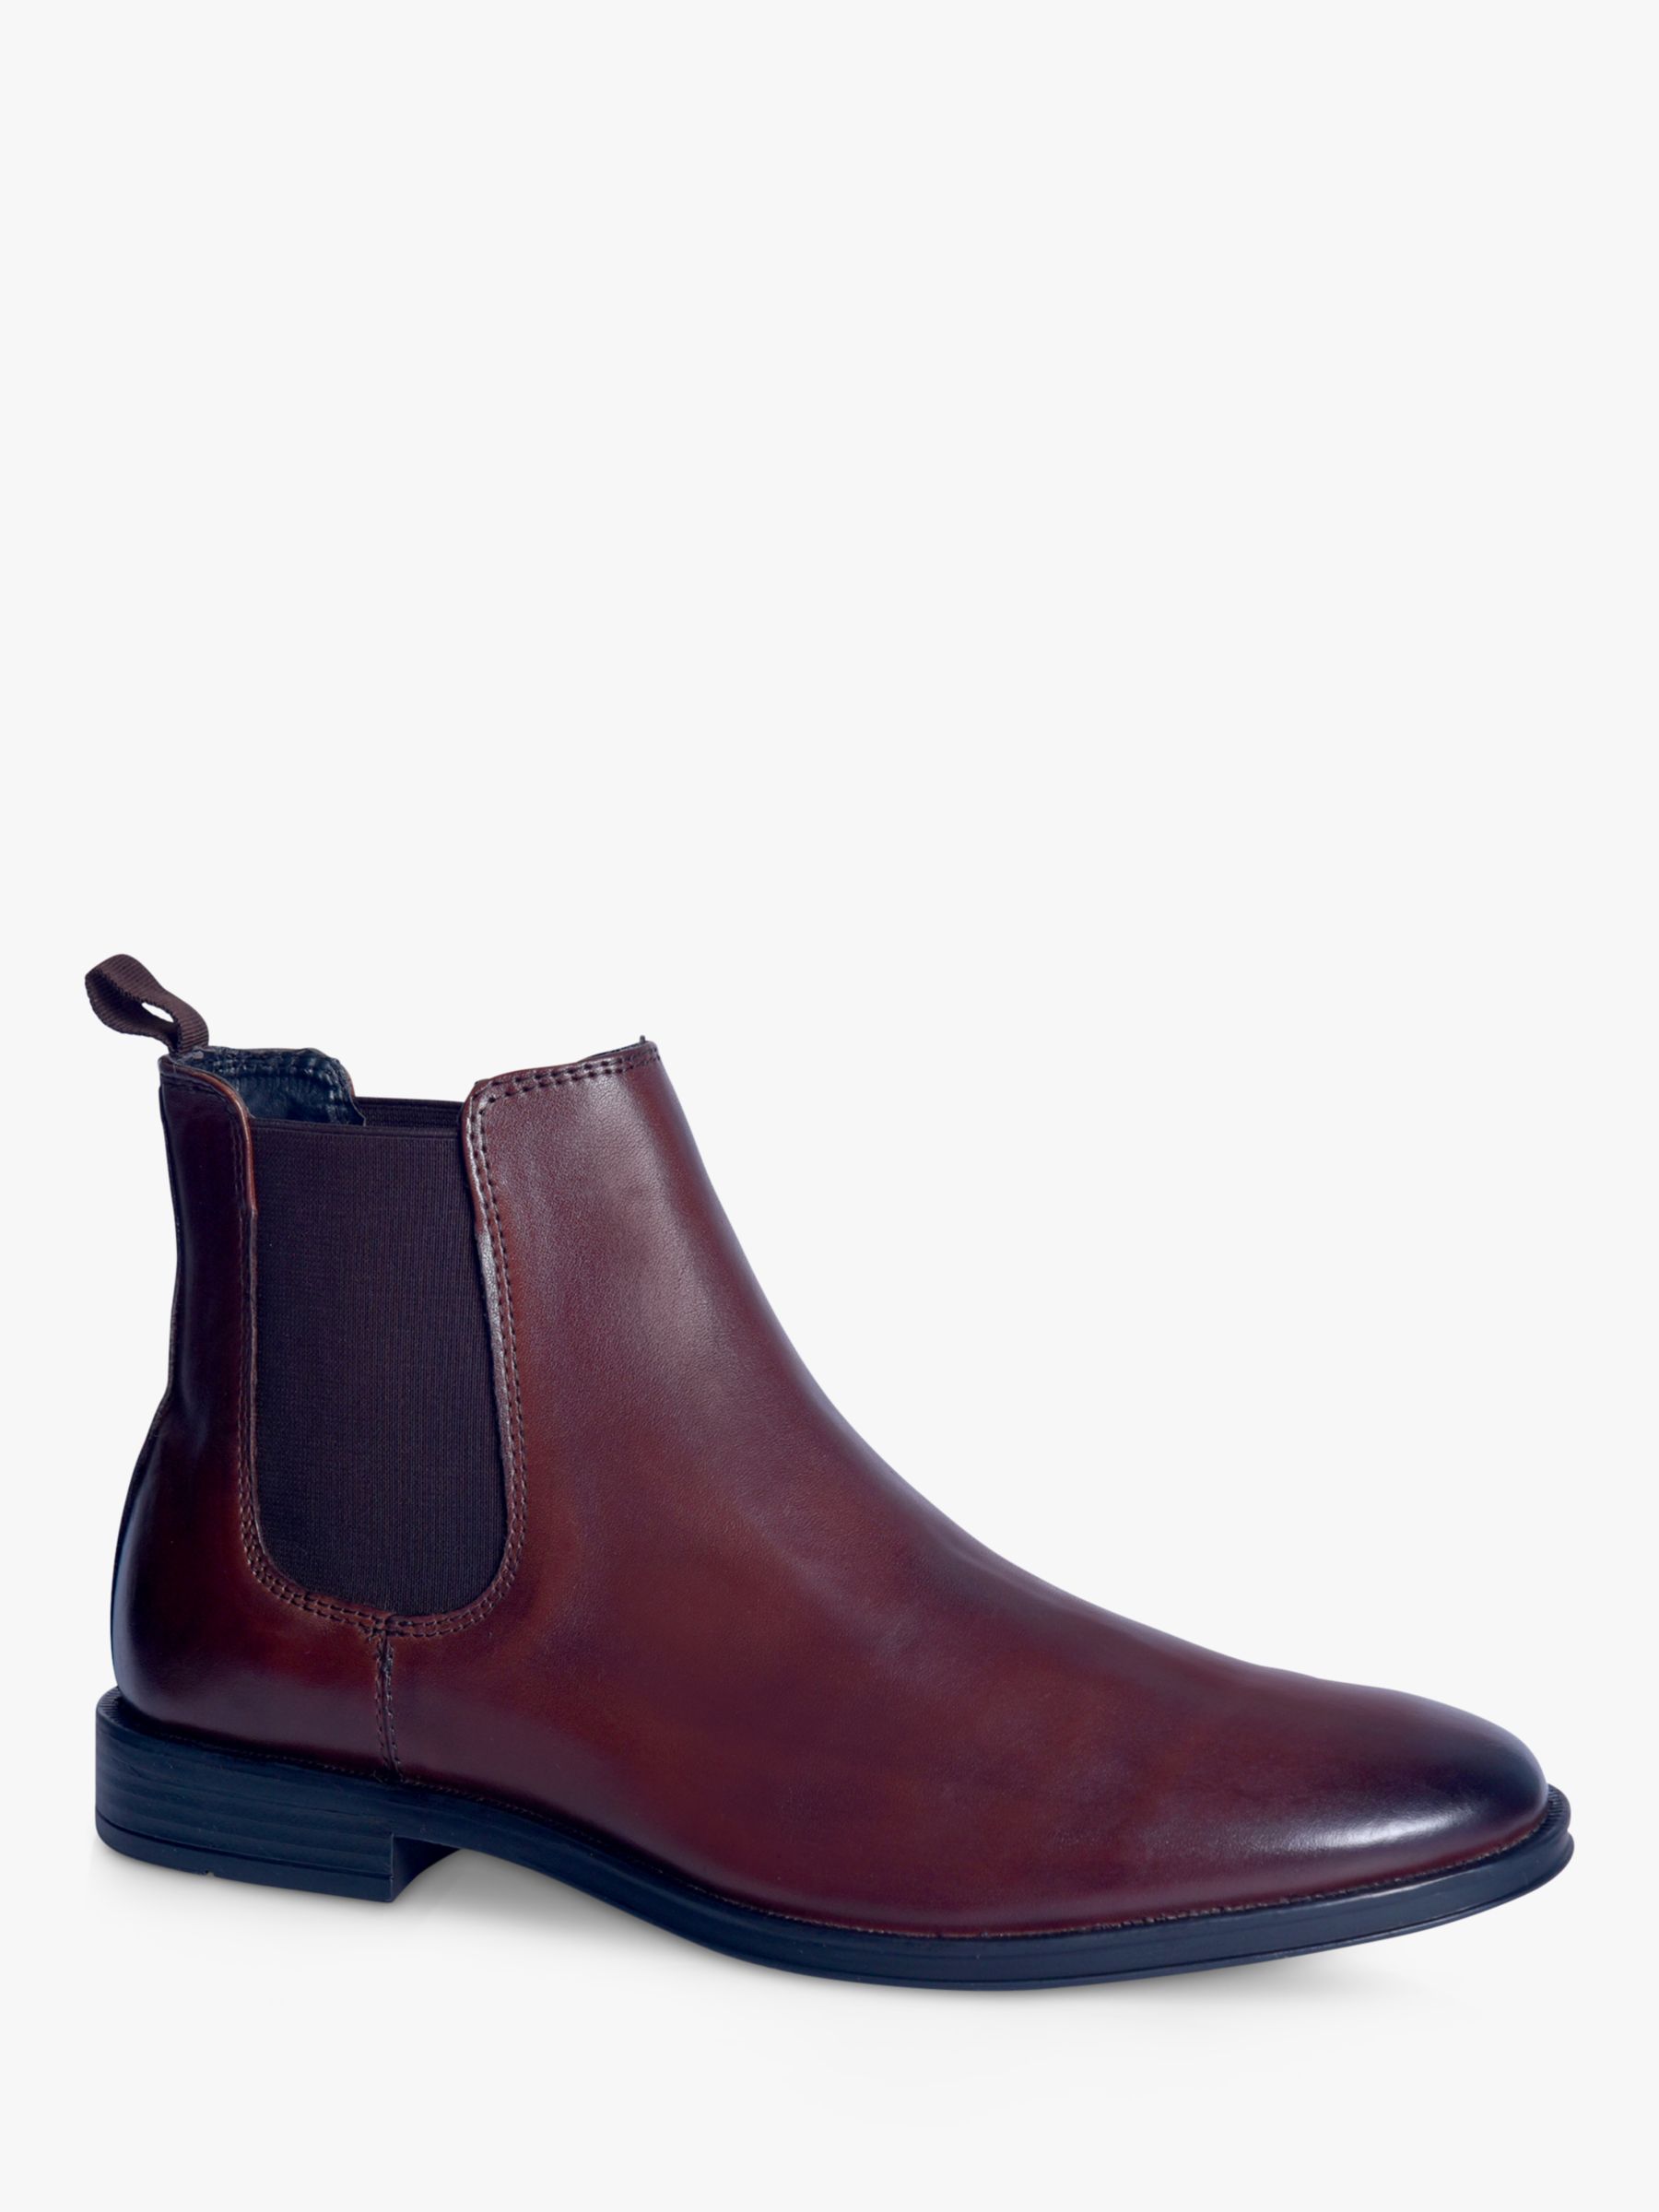 Buy Silver Street London Islington Leather Chelsea Boots Online at johnlewis.com